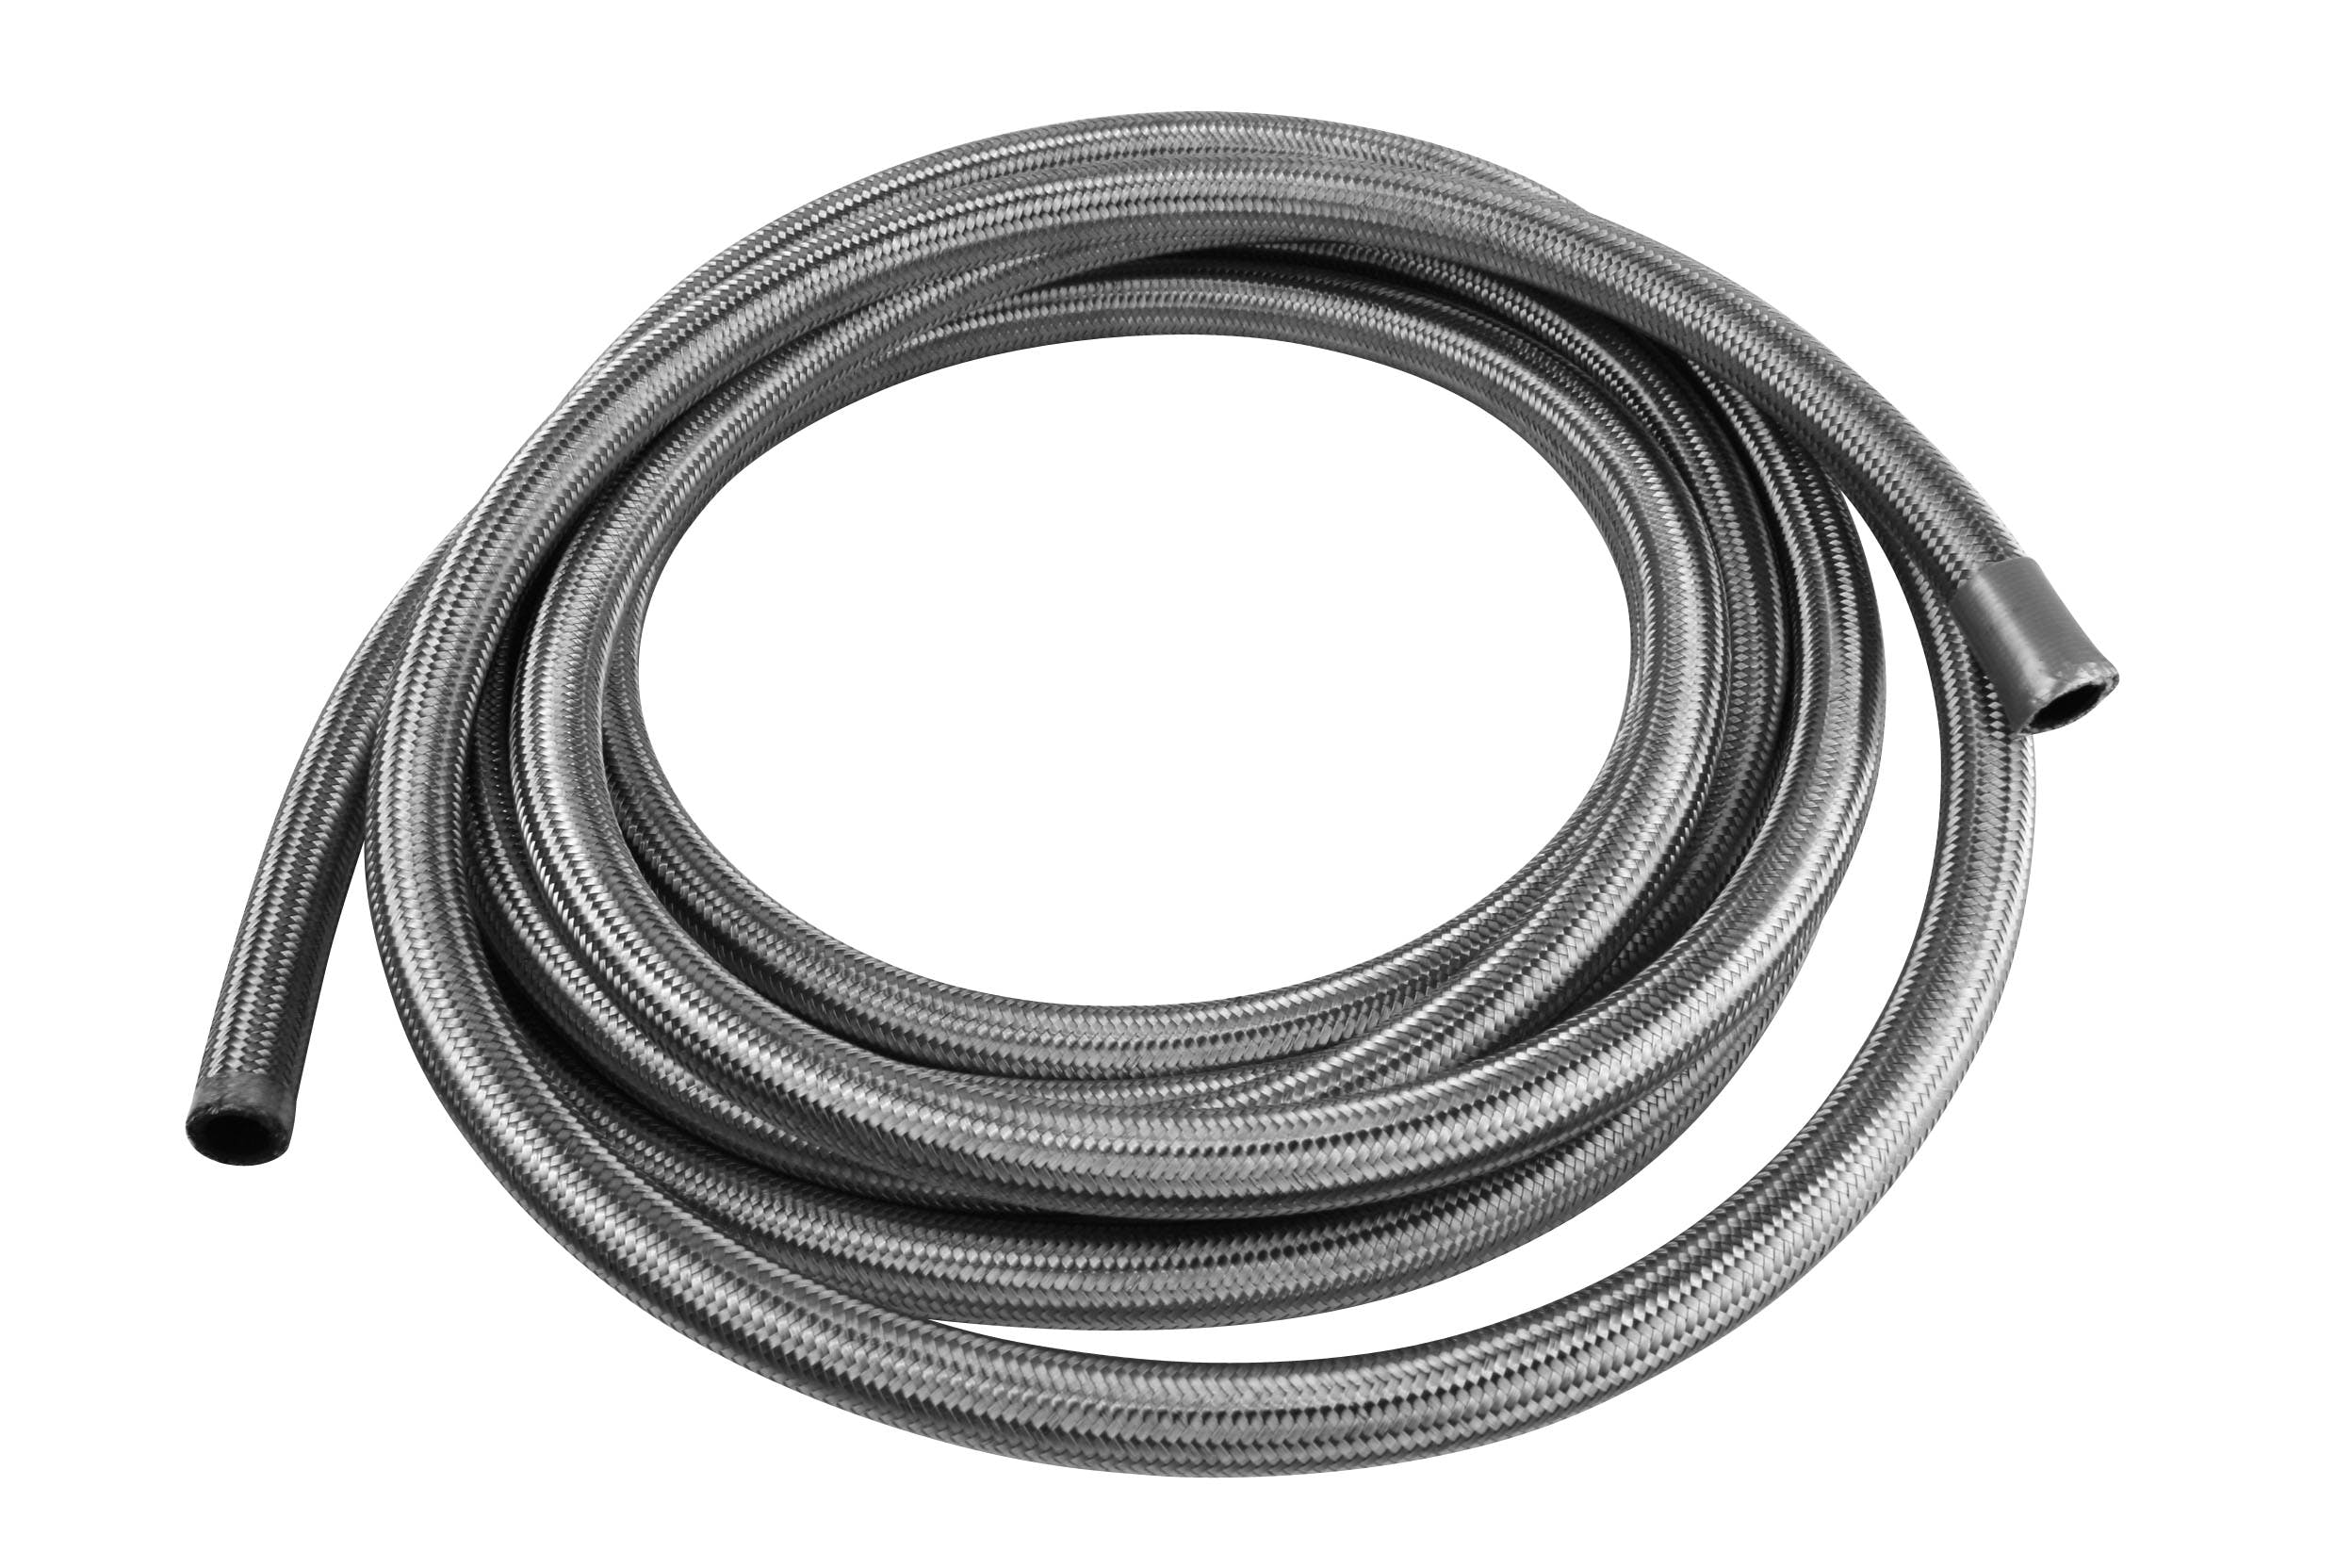 Aeromotive Fuel System 15710 Hose, Fuel, Stainless Steel Braided, AN-10 x 20